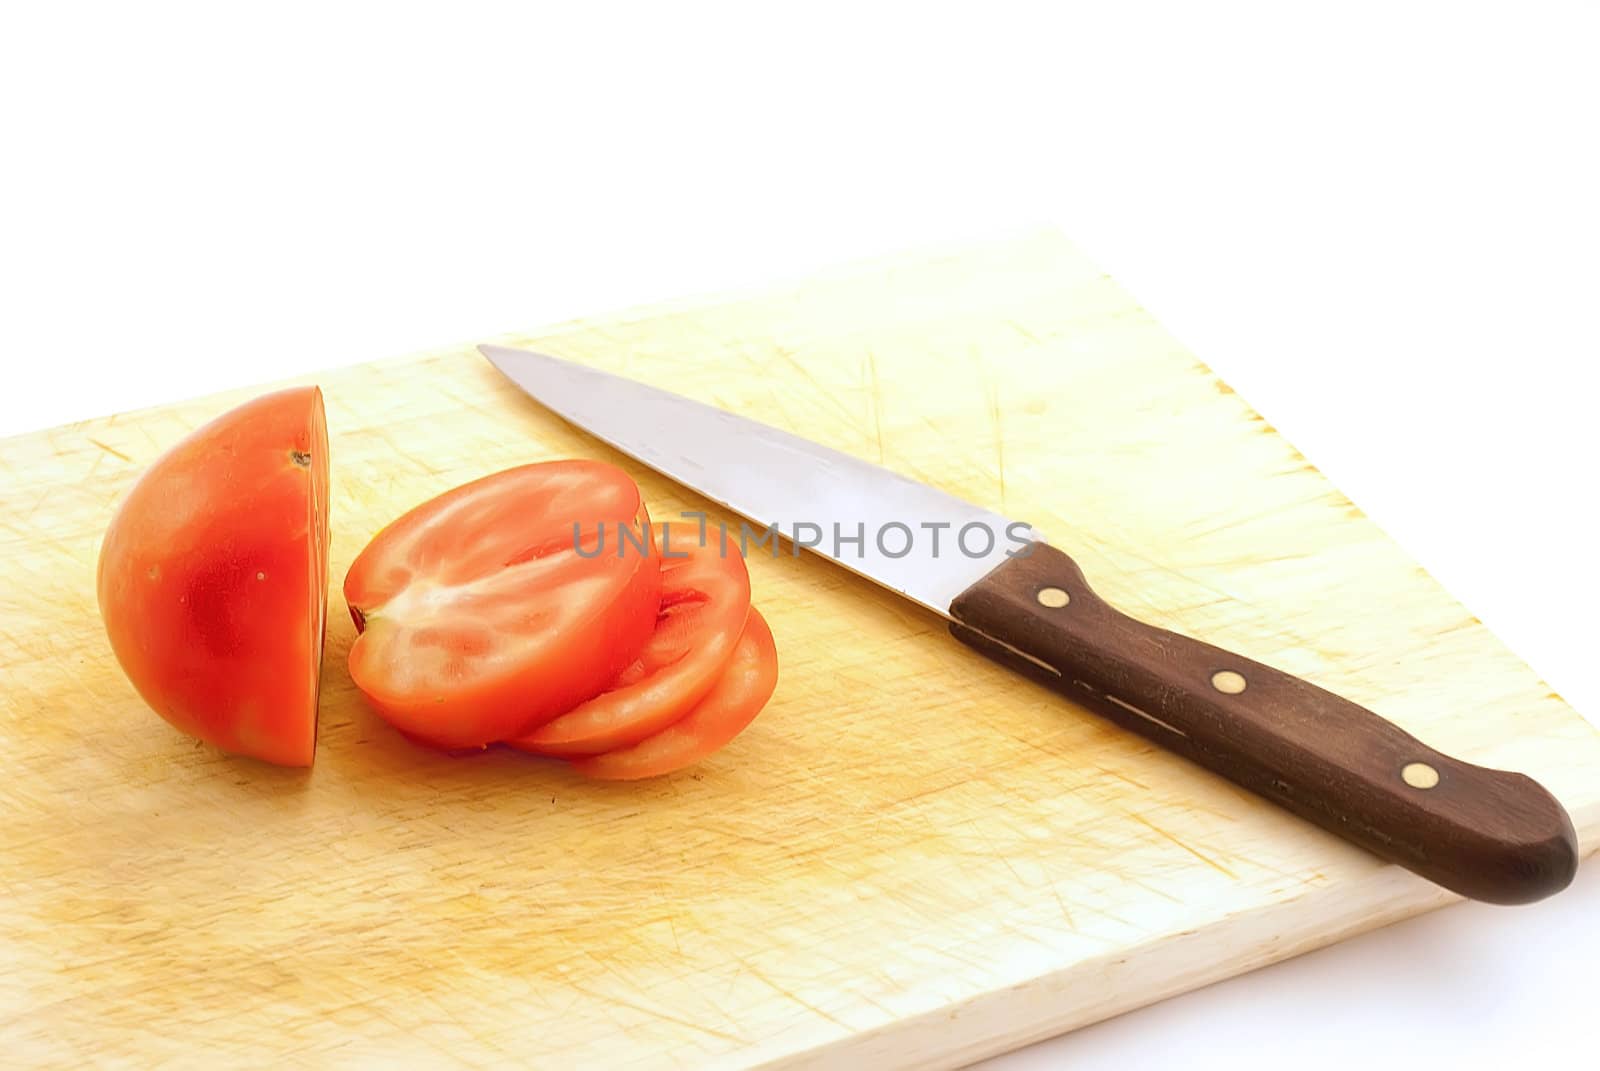 The cut tomato and knife on a board by Diversphoto